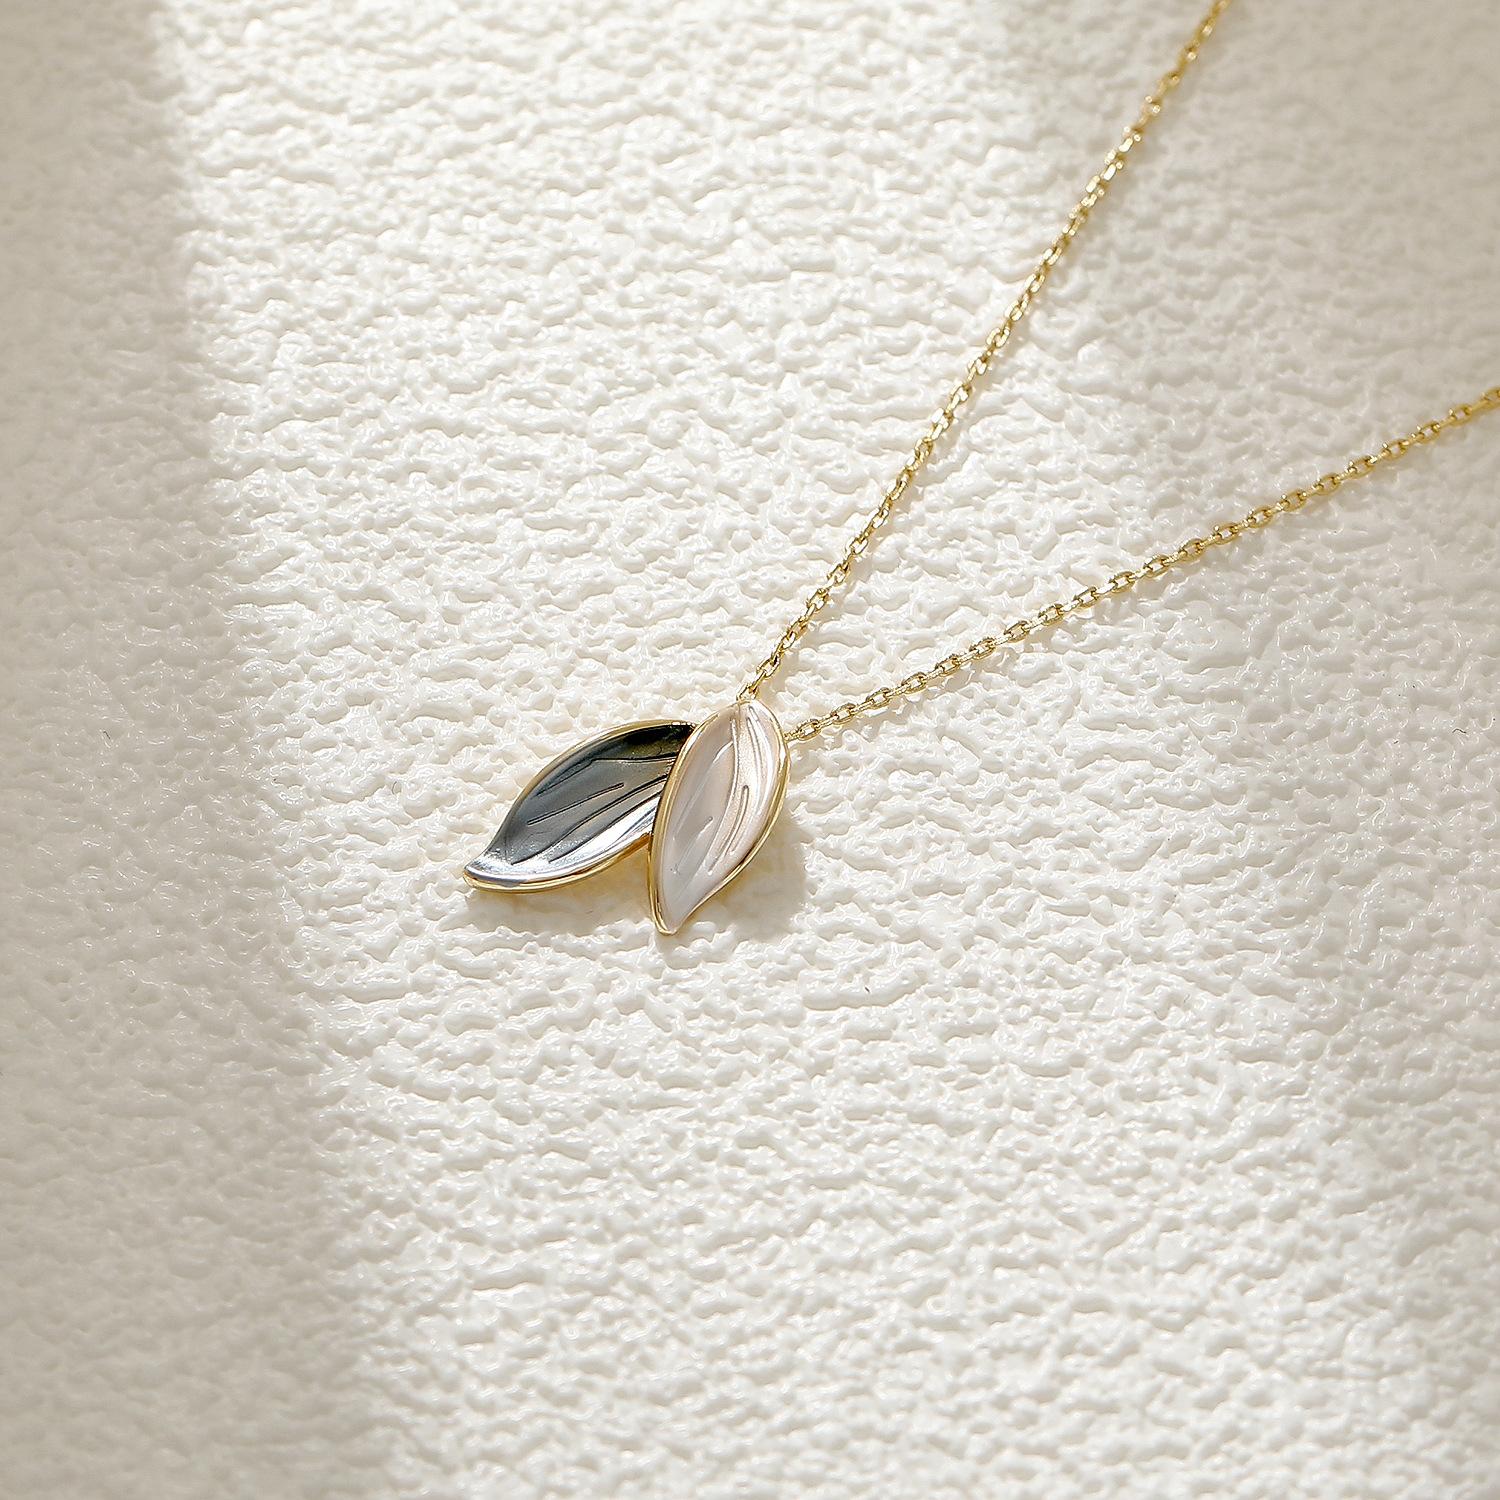 The Blue and White Leaf Necklace